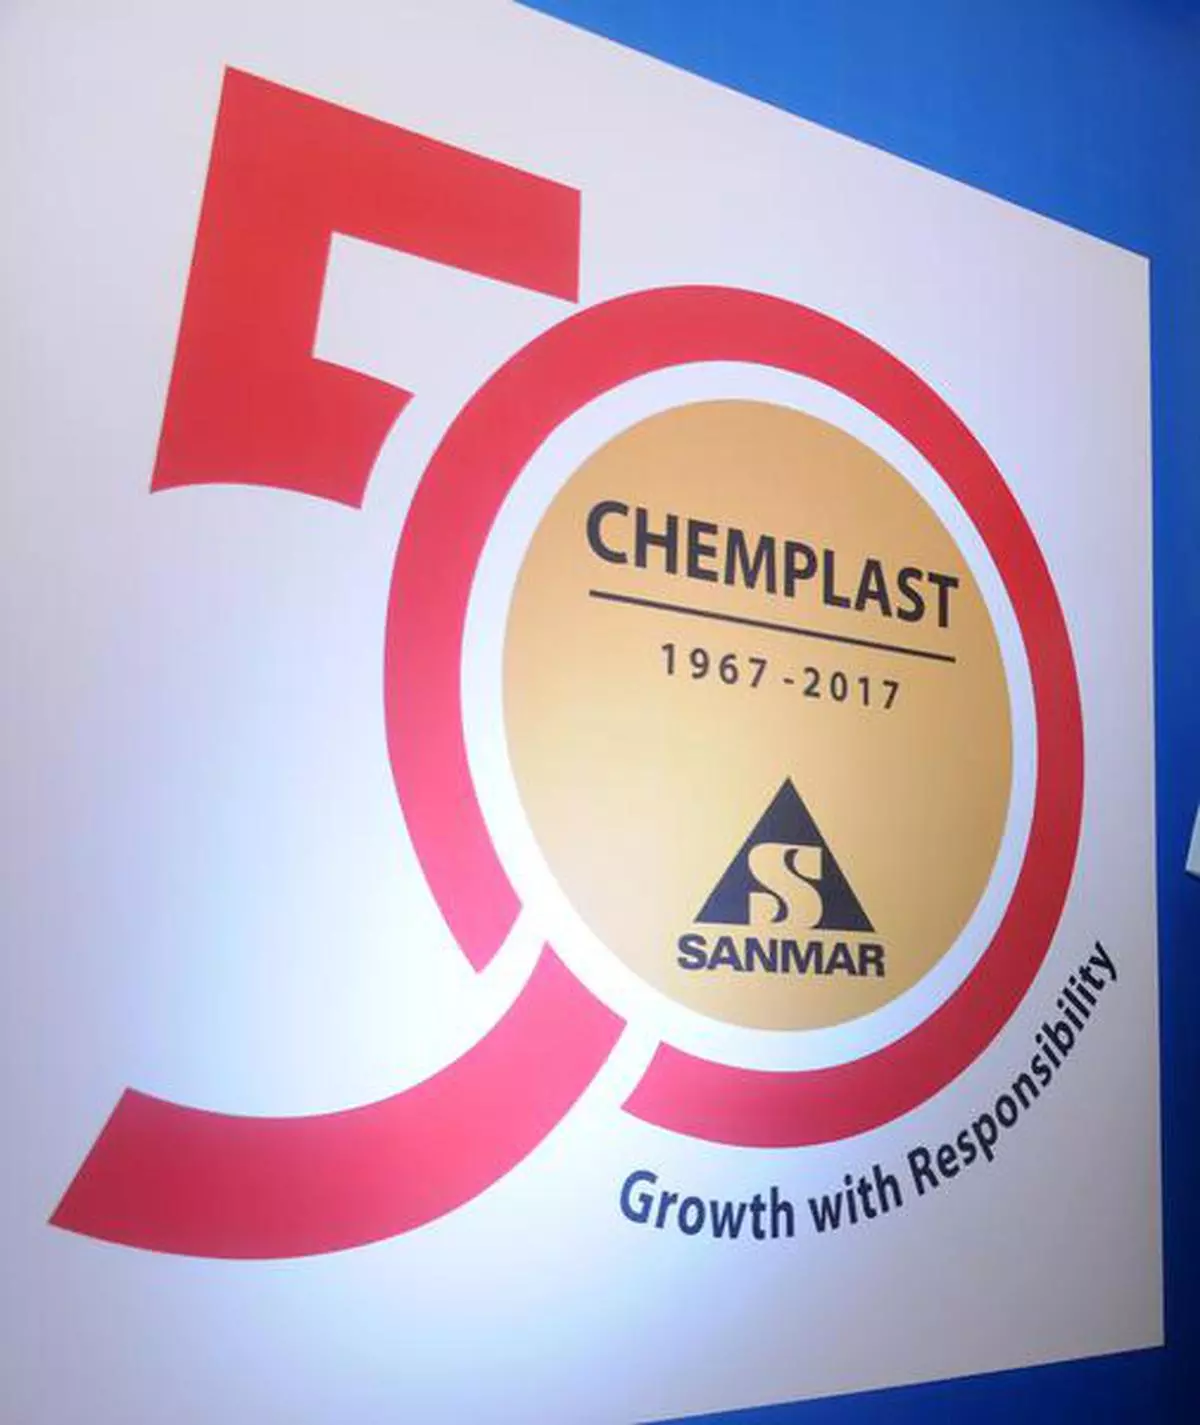 CHENNAI, TAMIL NADU, 04/05/2017: The name board with company logo at the Golden Jubilee celebration of Chemplast Sanmar, in Chennai on May 4, 2017. Photo: Bijoy Ghosh